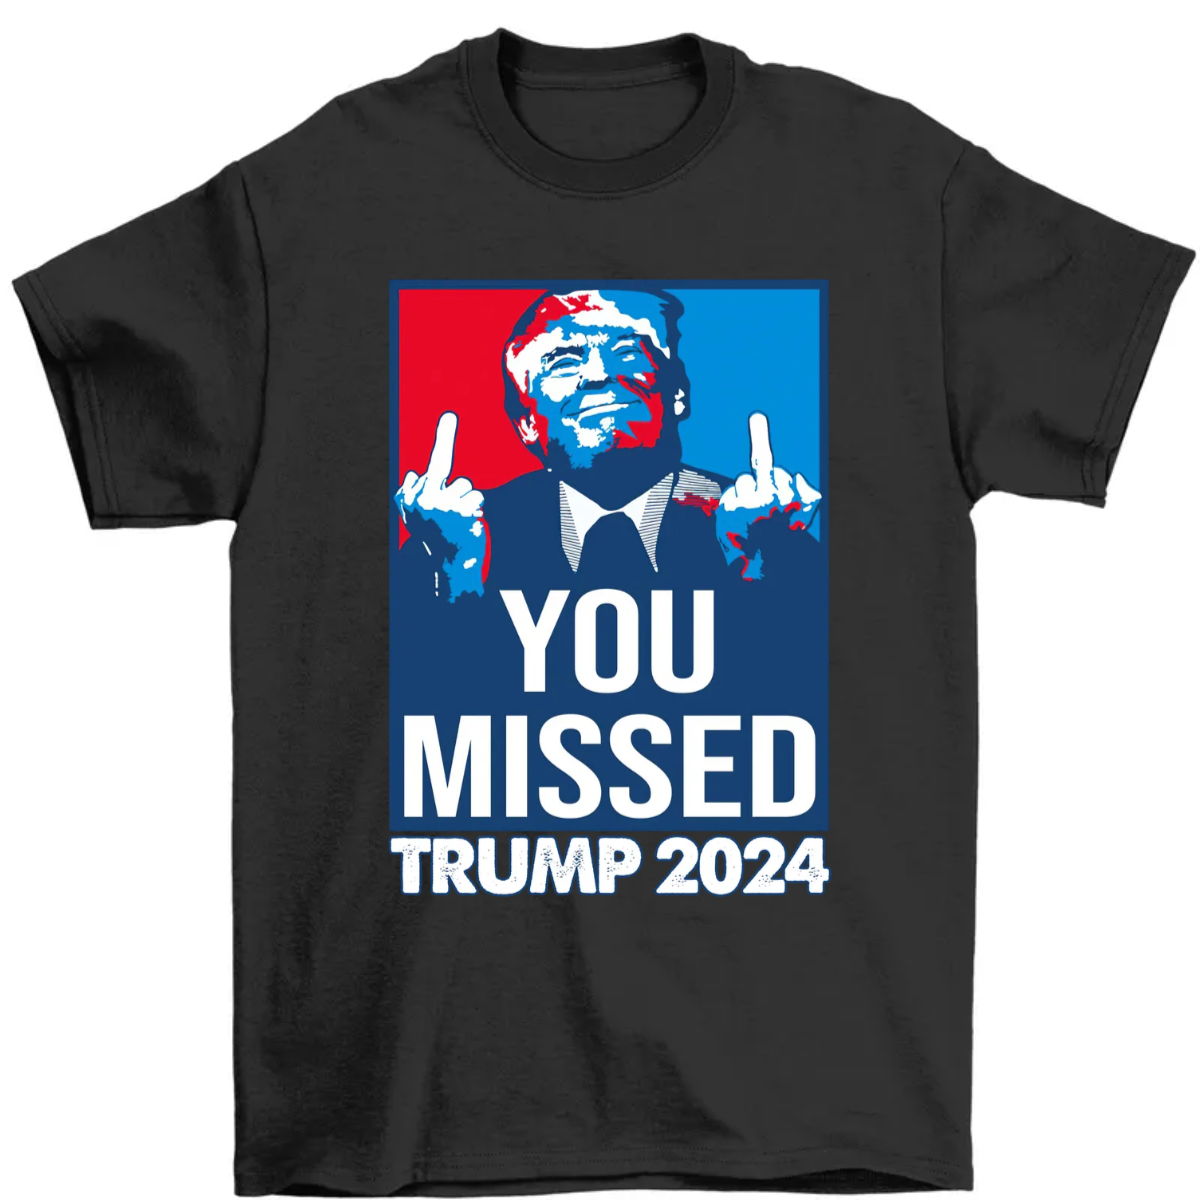 Wild Bobby Trump You Missed Shooting Assassination Attempt Middle Finger Rally USA Patriotic Shirt